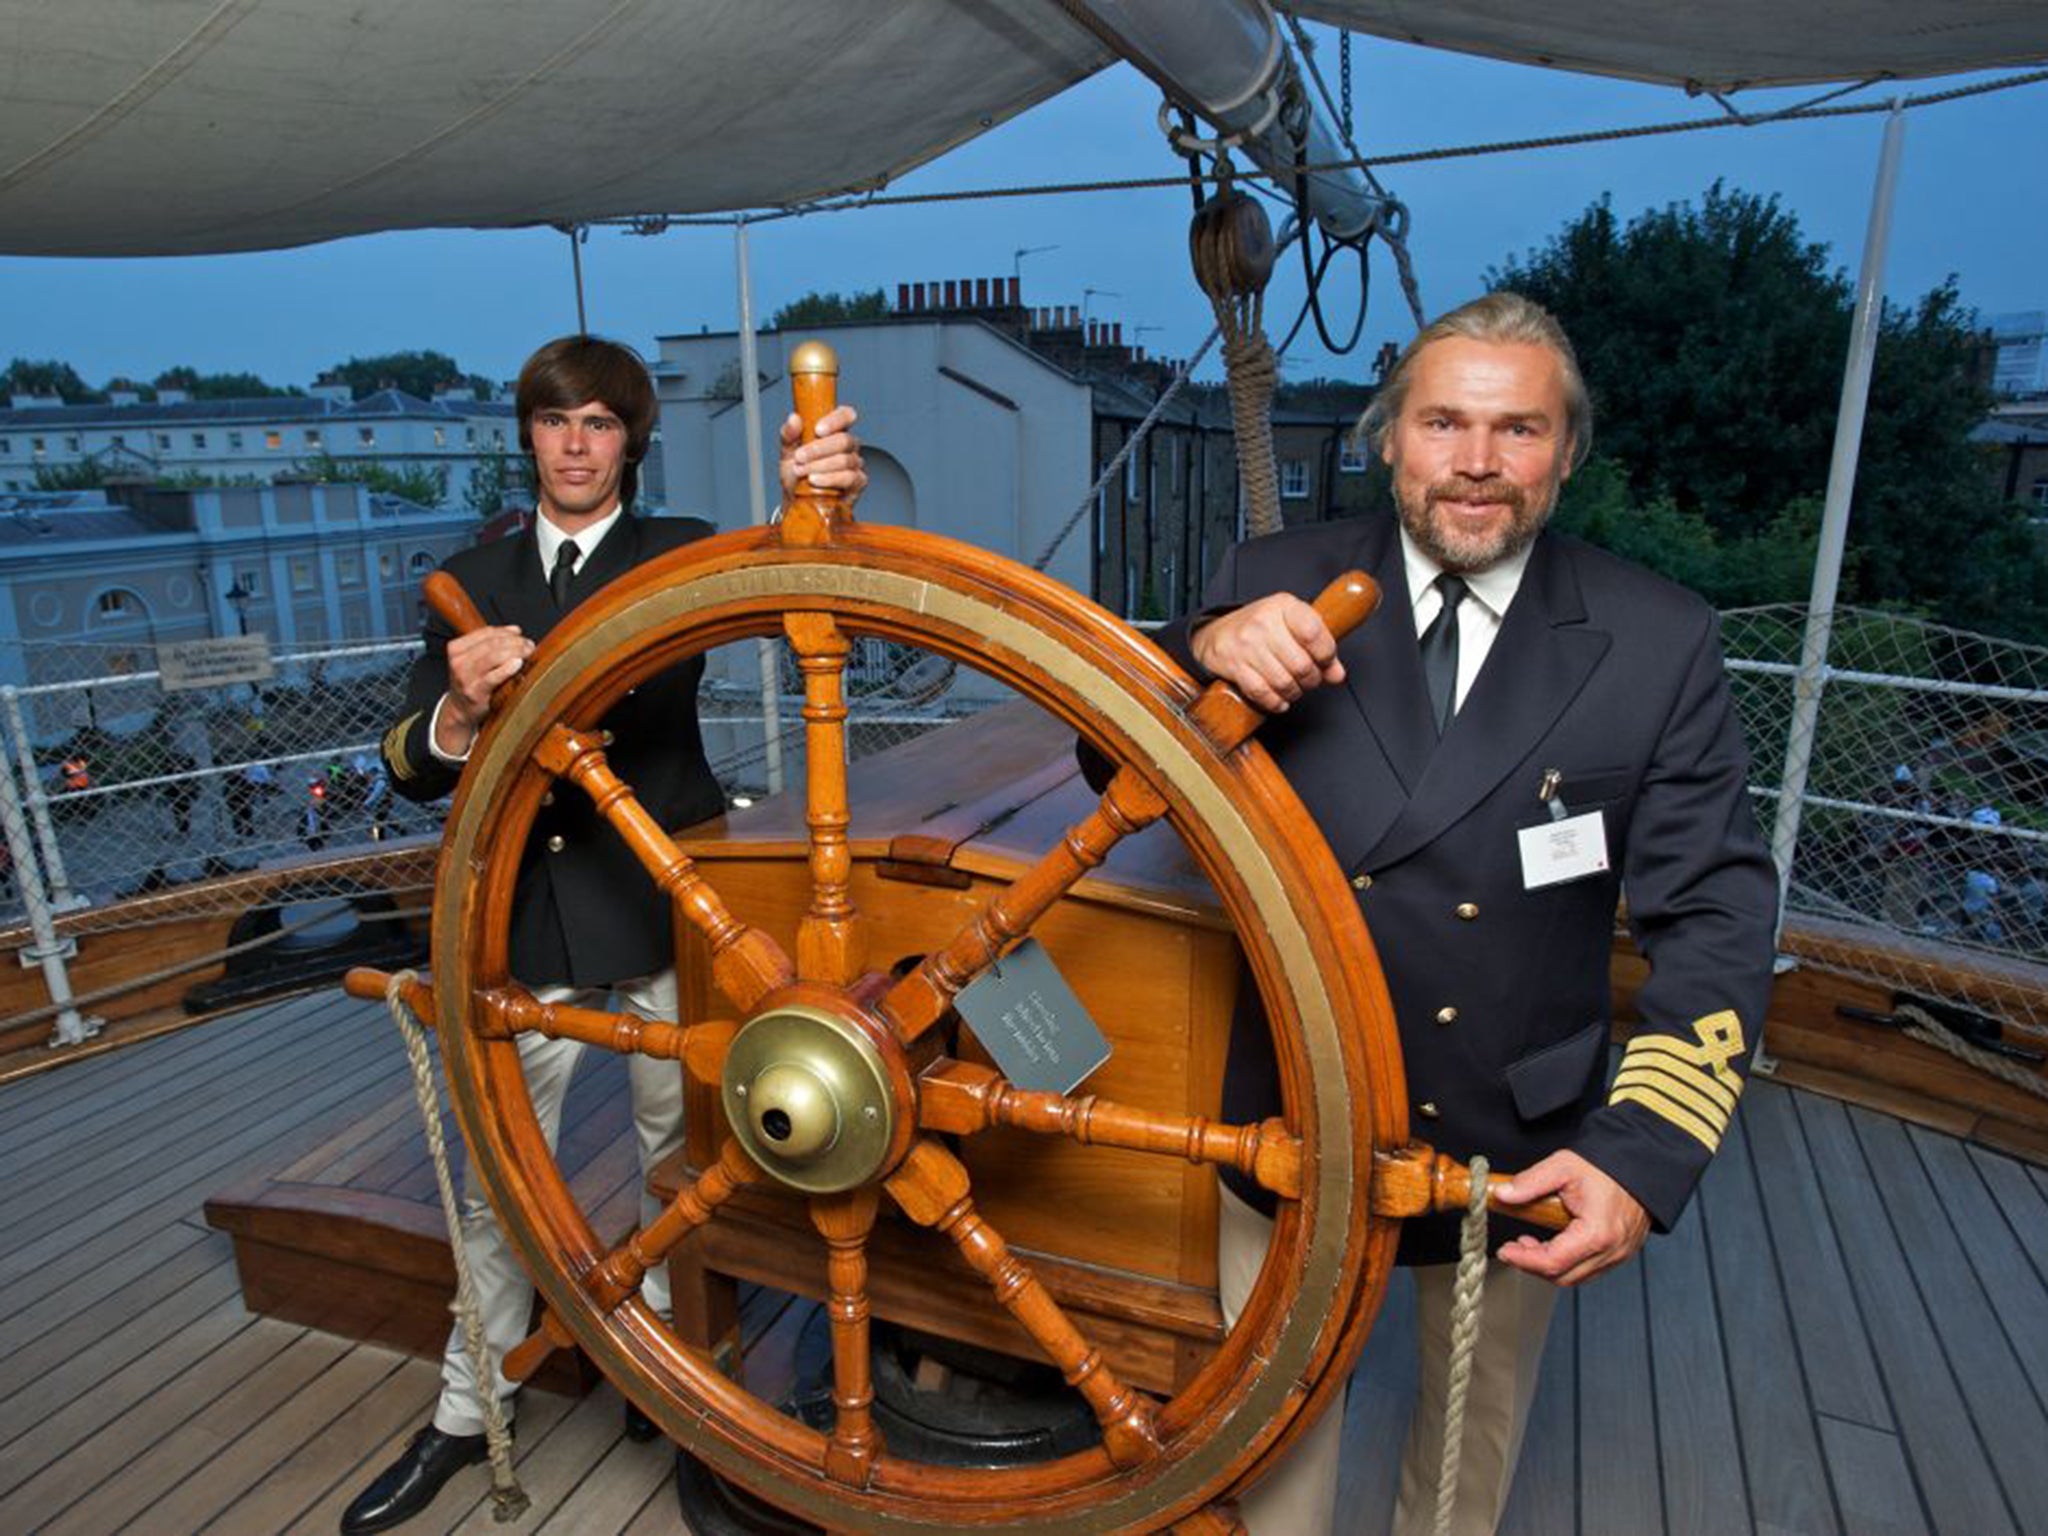 Vladimir Martus, right, at the wheel of the restored Cutty Sark in Greenwich, London